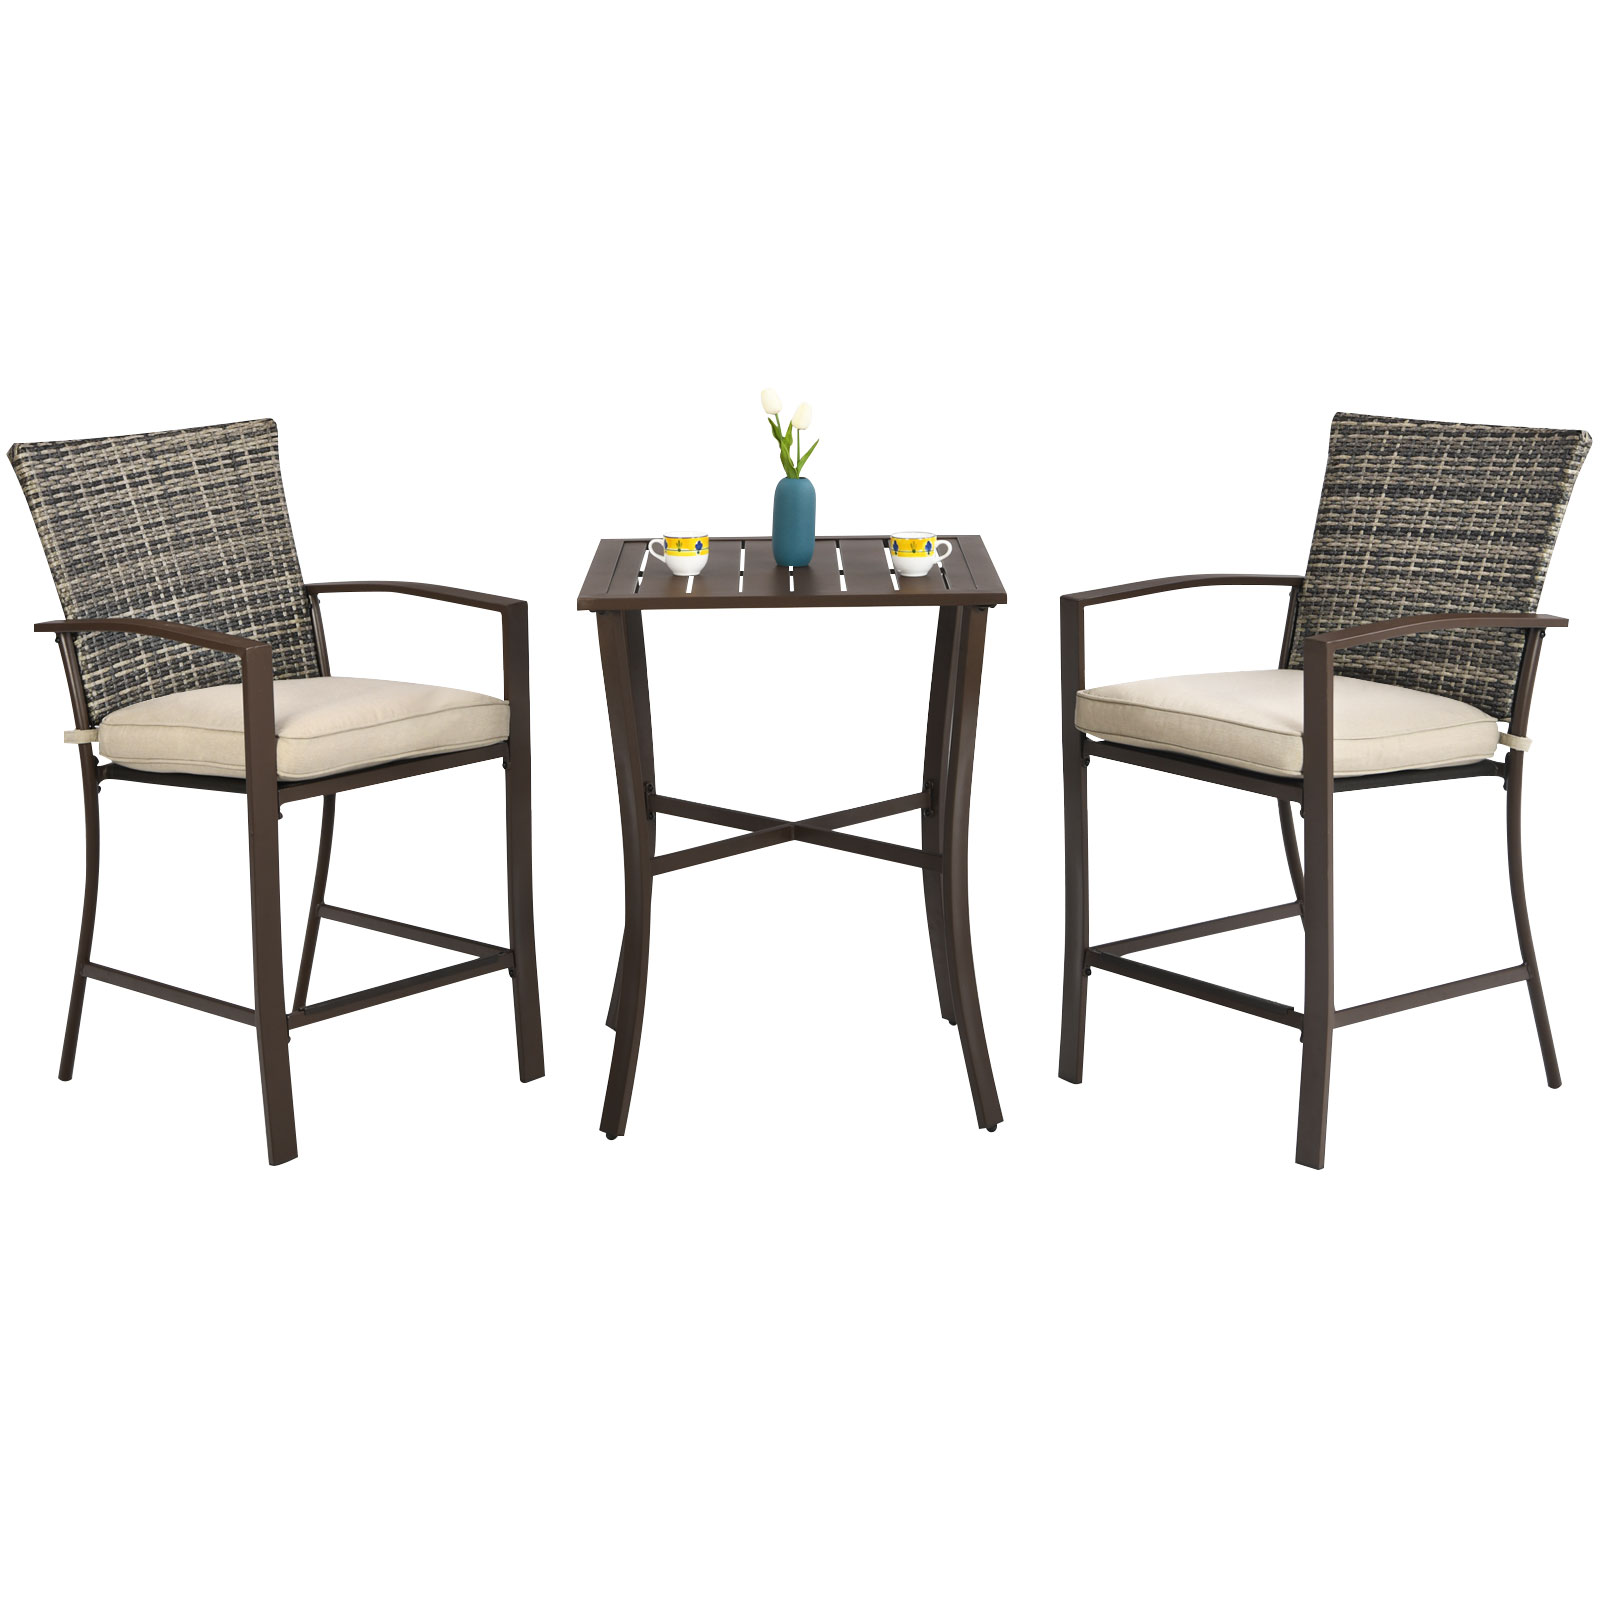 Patiojoy 3-Piece Patio Rattan Furniture Set Outdoor Bistro Set Cushioned Chairs & Table Set Brown - image 4 of 5